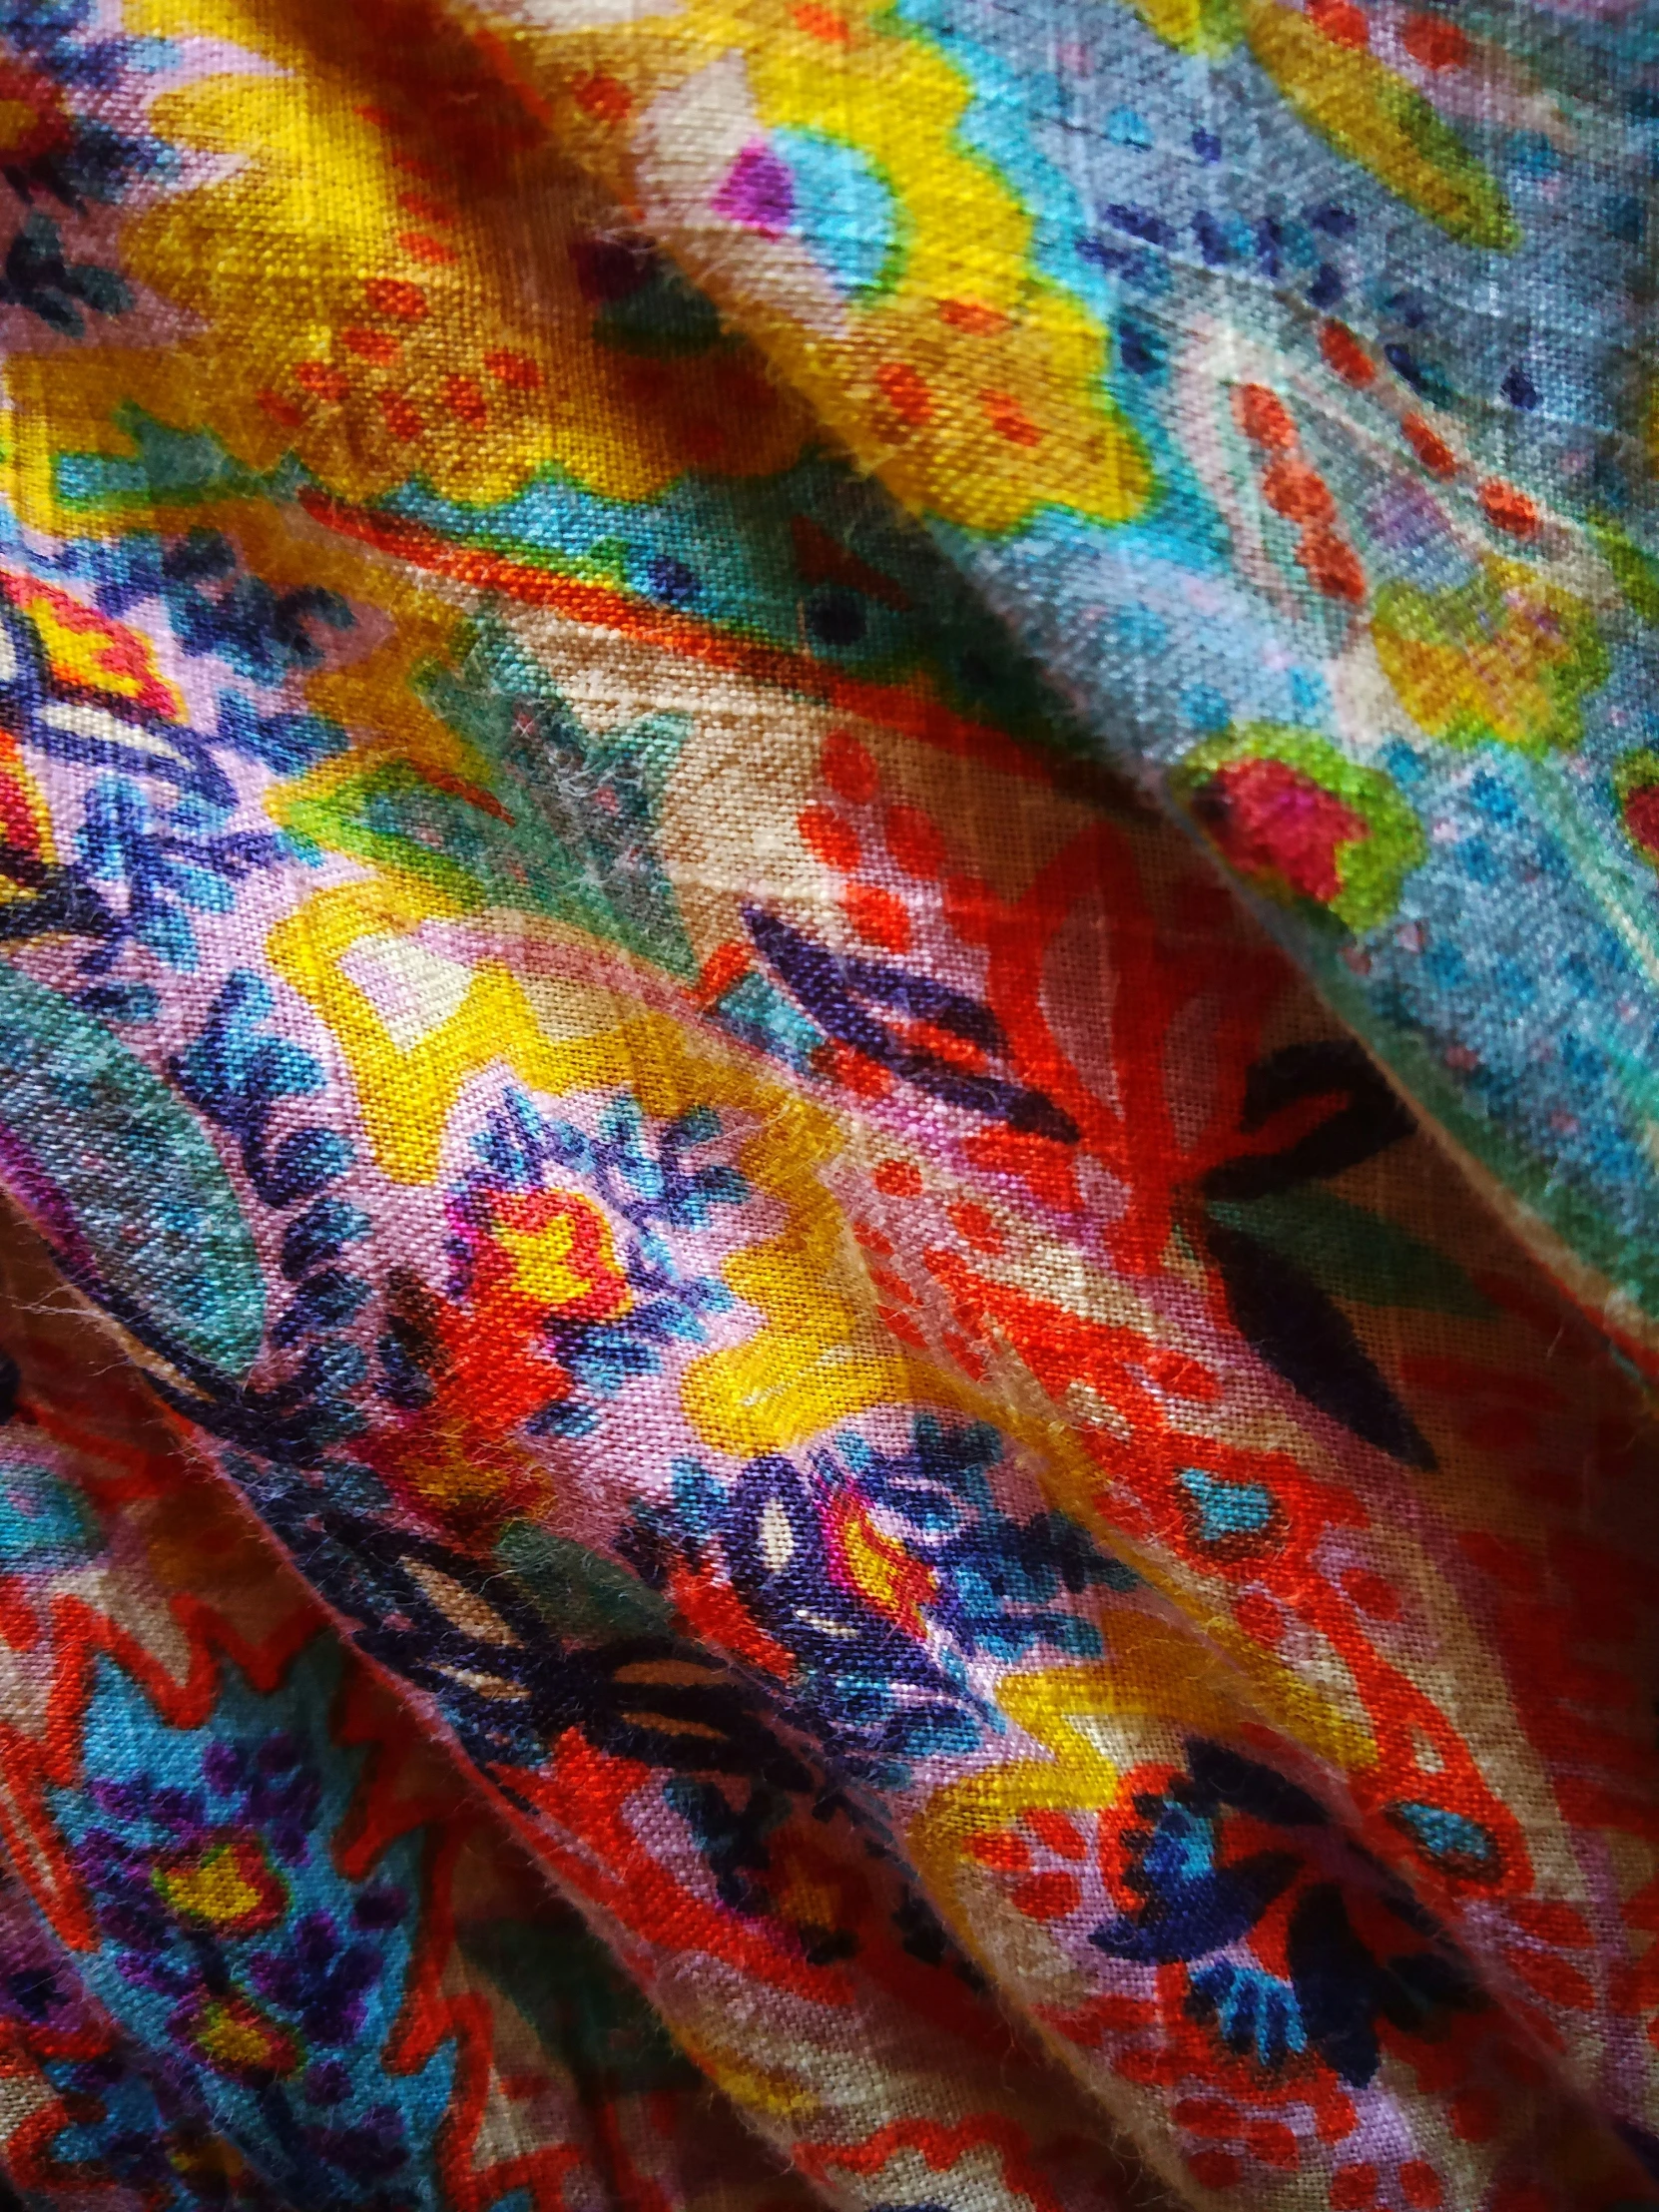 fabric with a multicolored pattern is shown